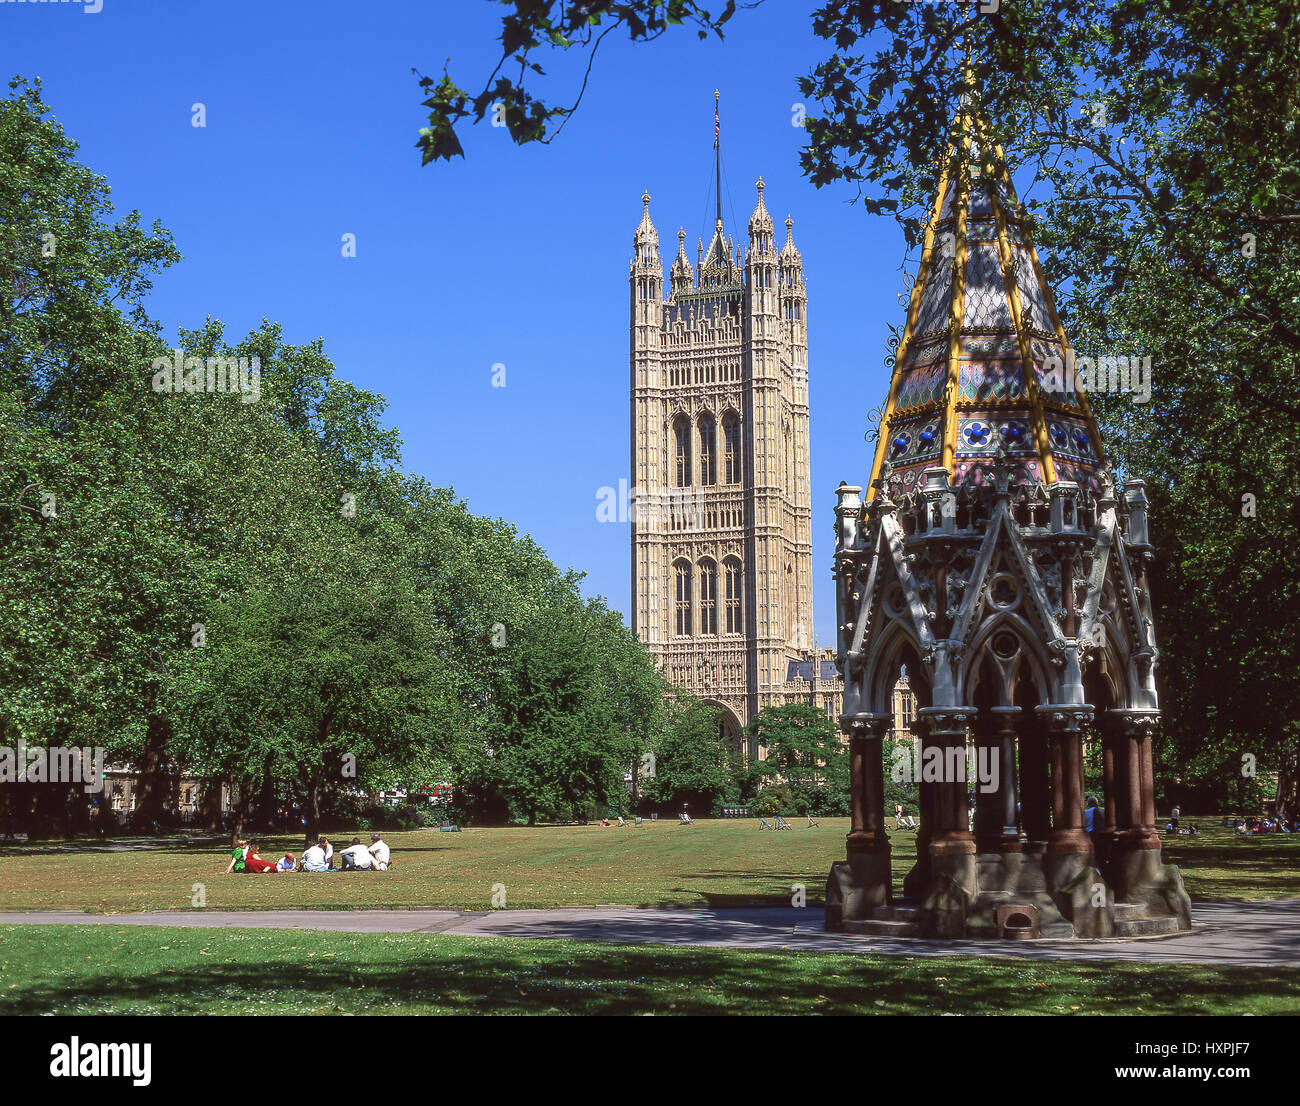 Palais de Westminster, de Victoria Tower Gardens, City of westminster, Greater London, Angleterre, Royaume-Uni Banque D'Images